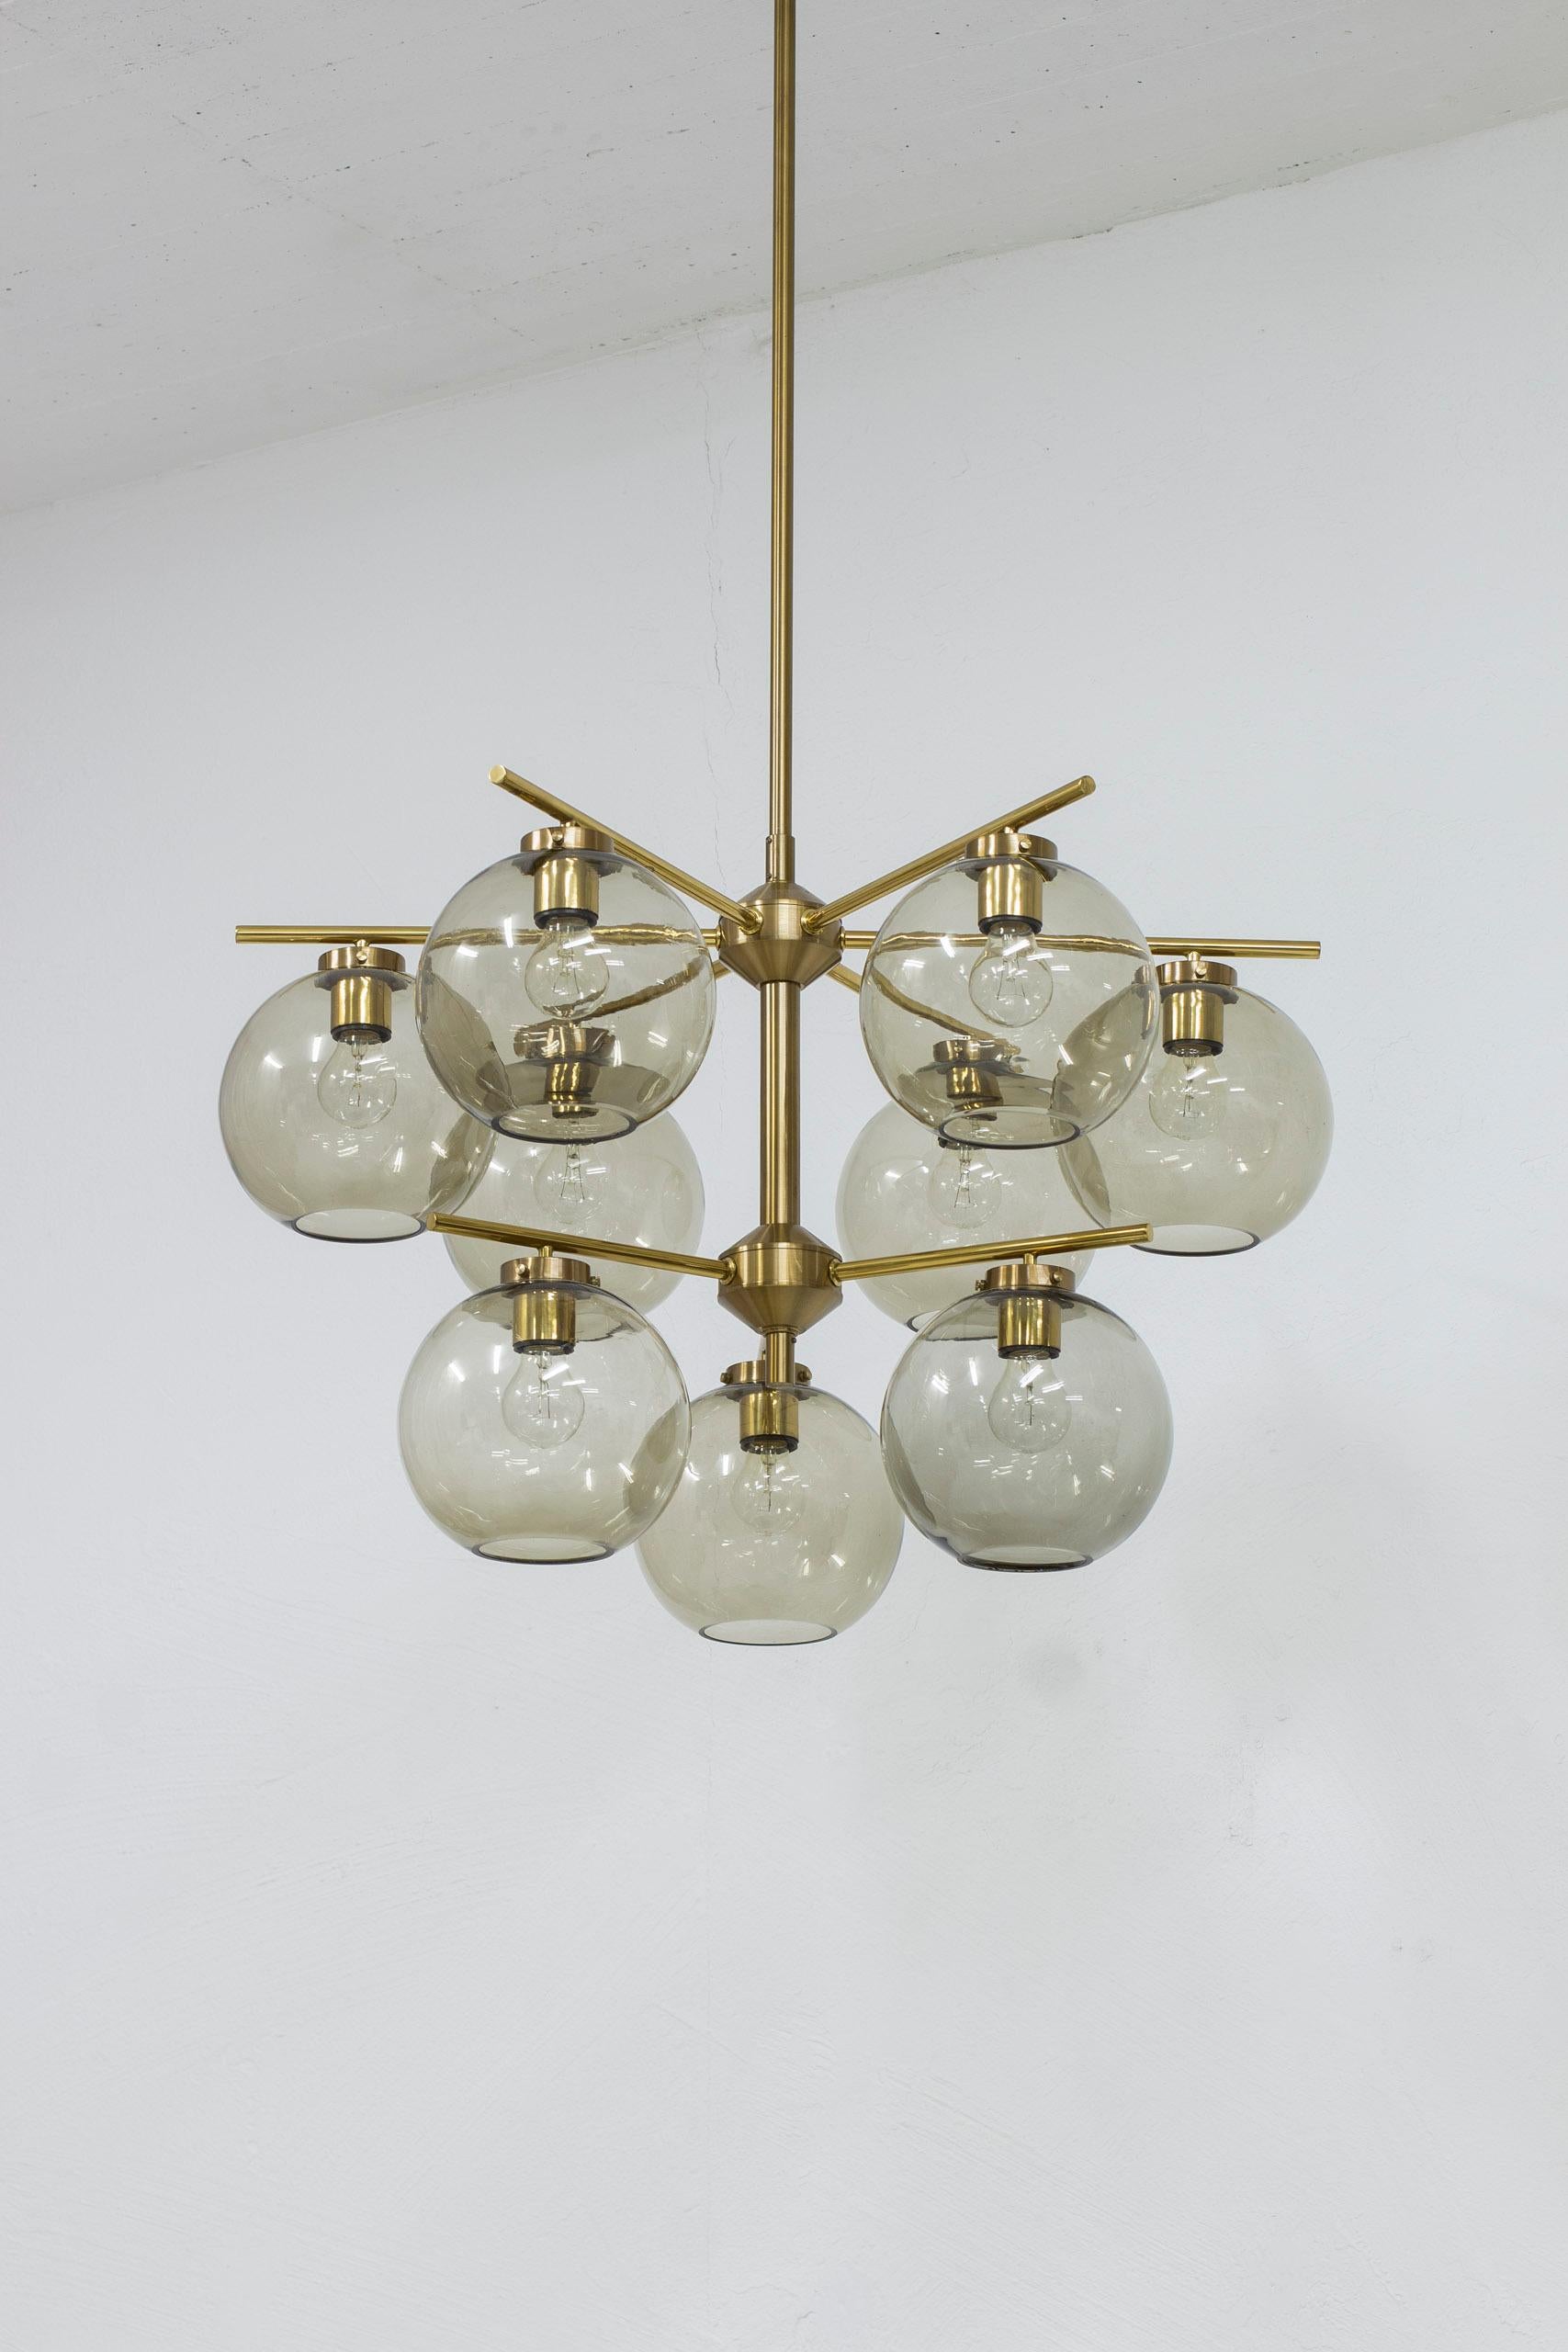 Scandinavian Modern Brass and smoked glass chandeliers by Holger Johansson, Sweden, 1960s